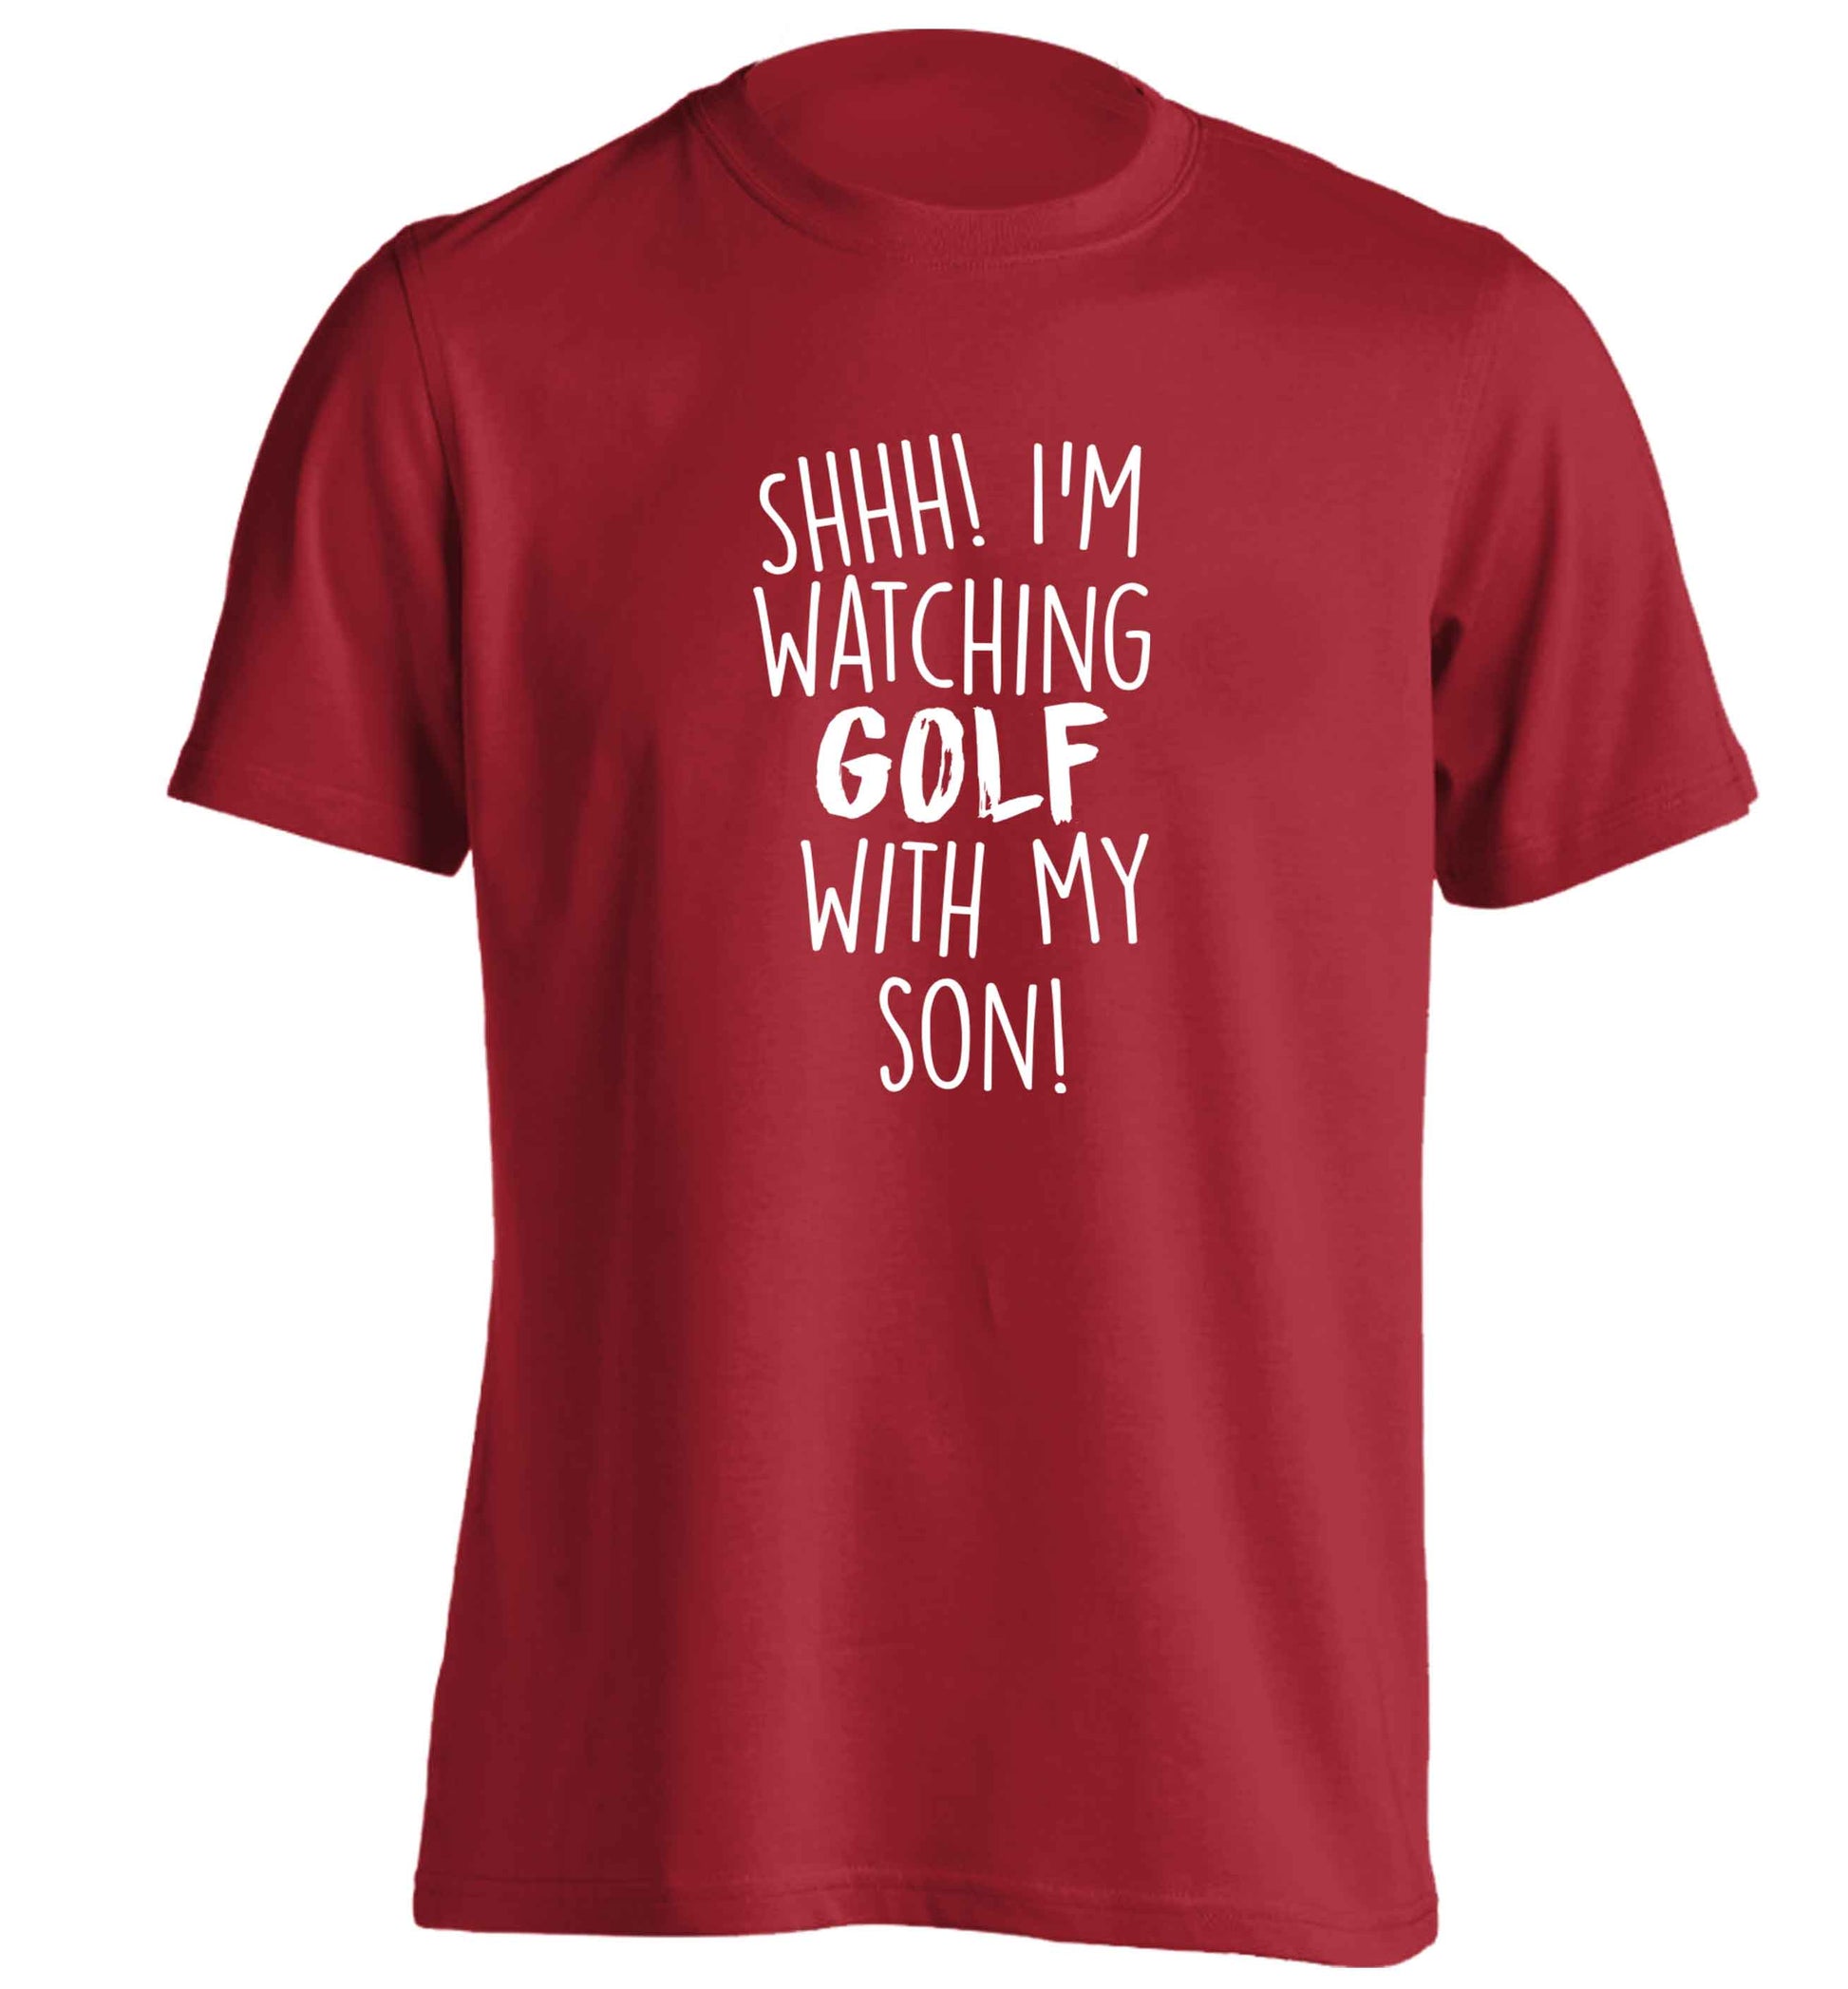 Shh I'm watching golf with my son adults unisex red Tshirt 2XL